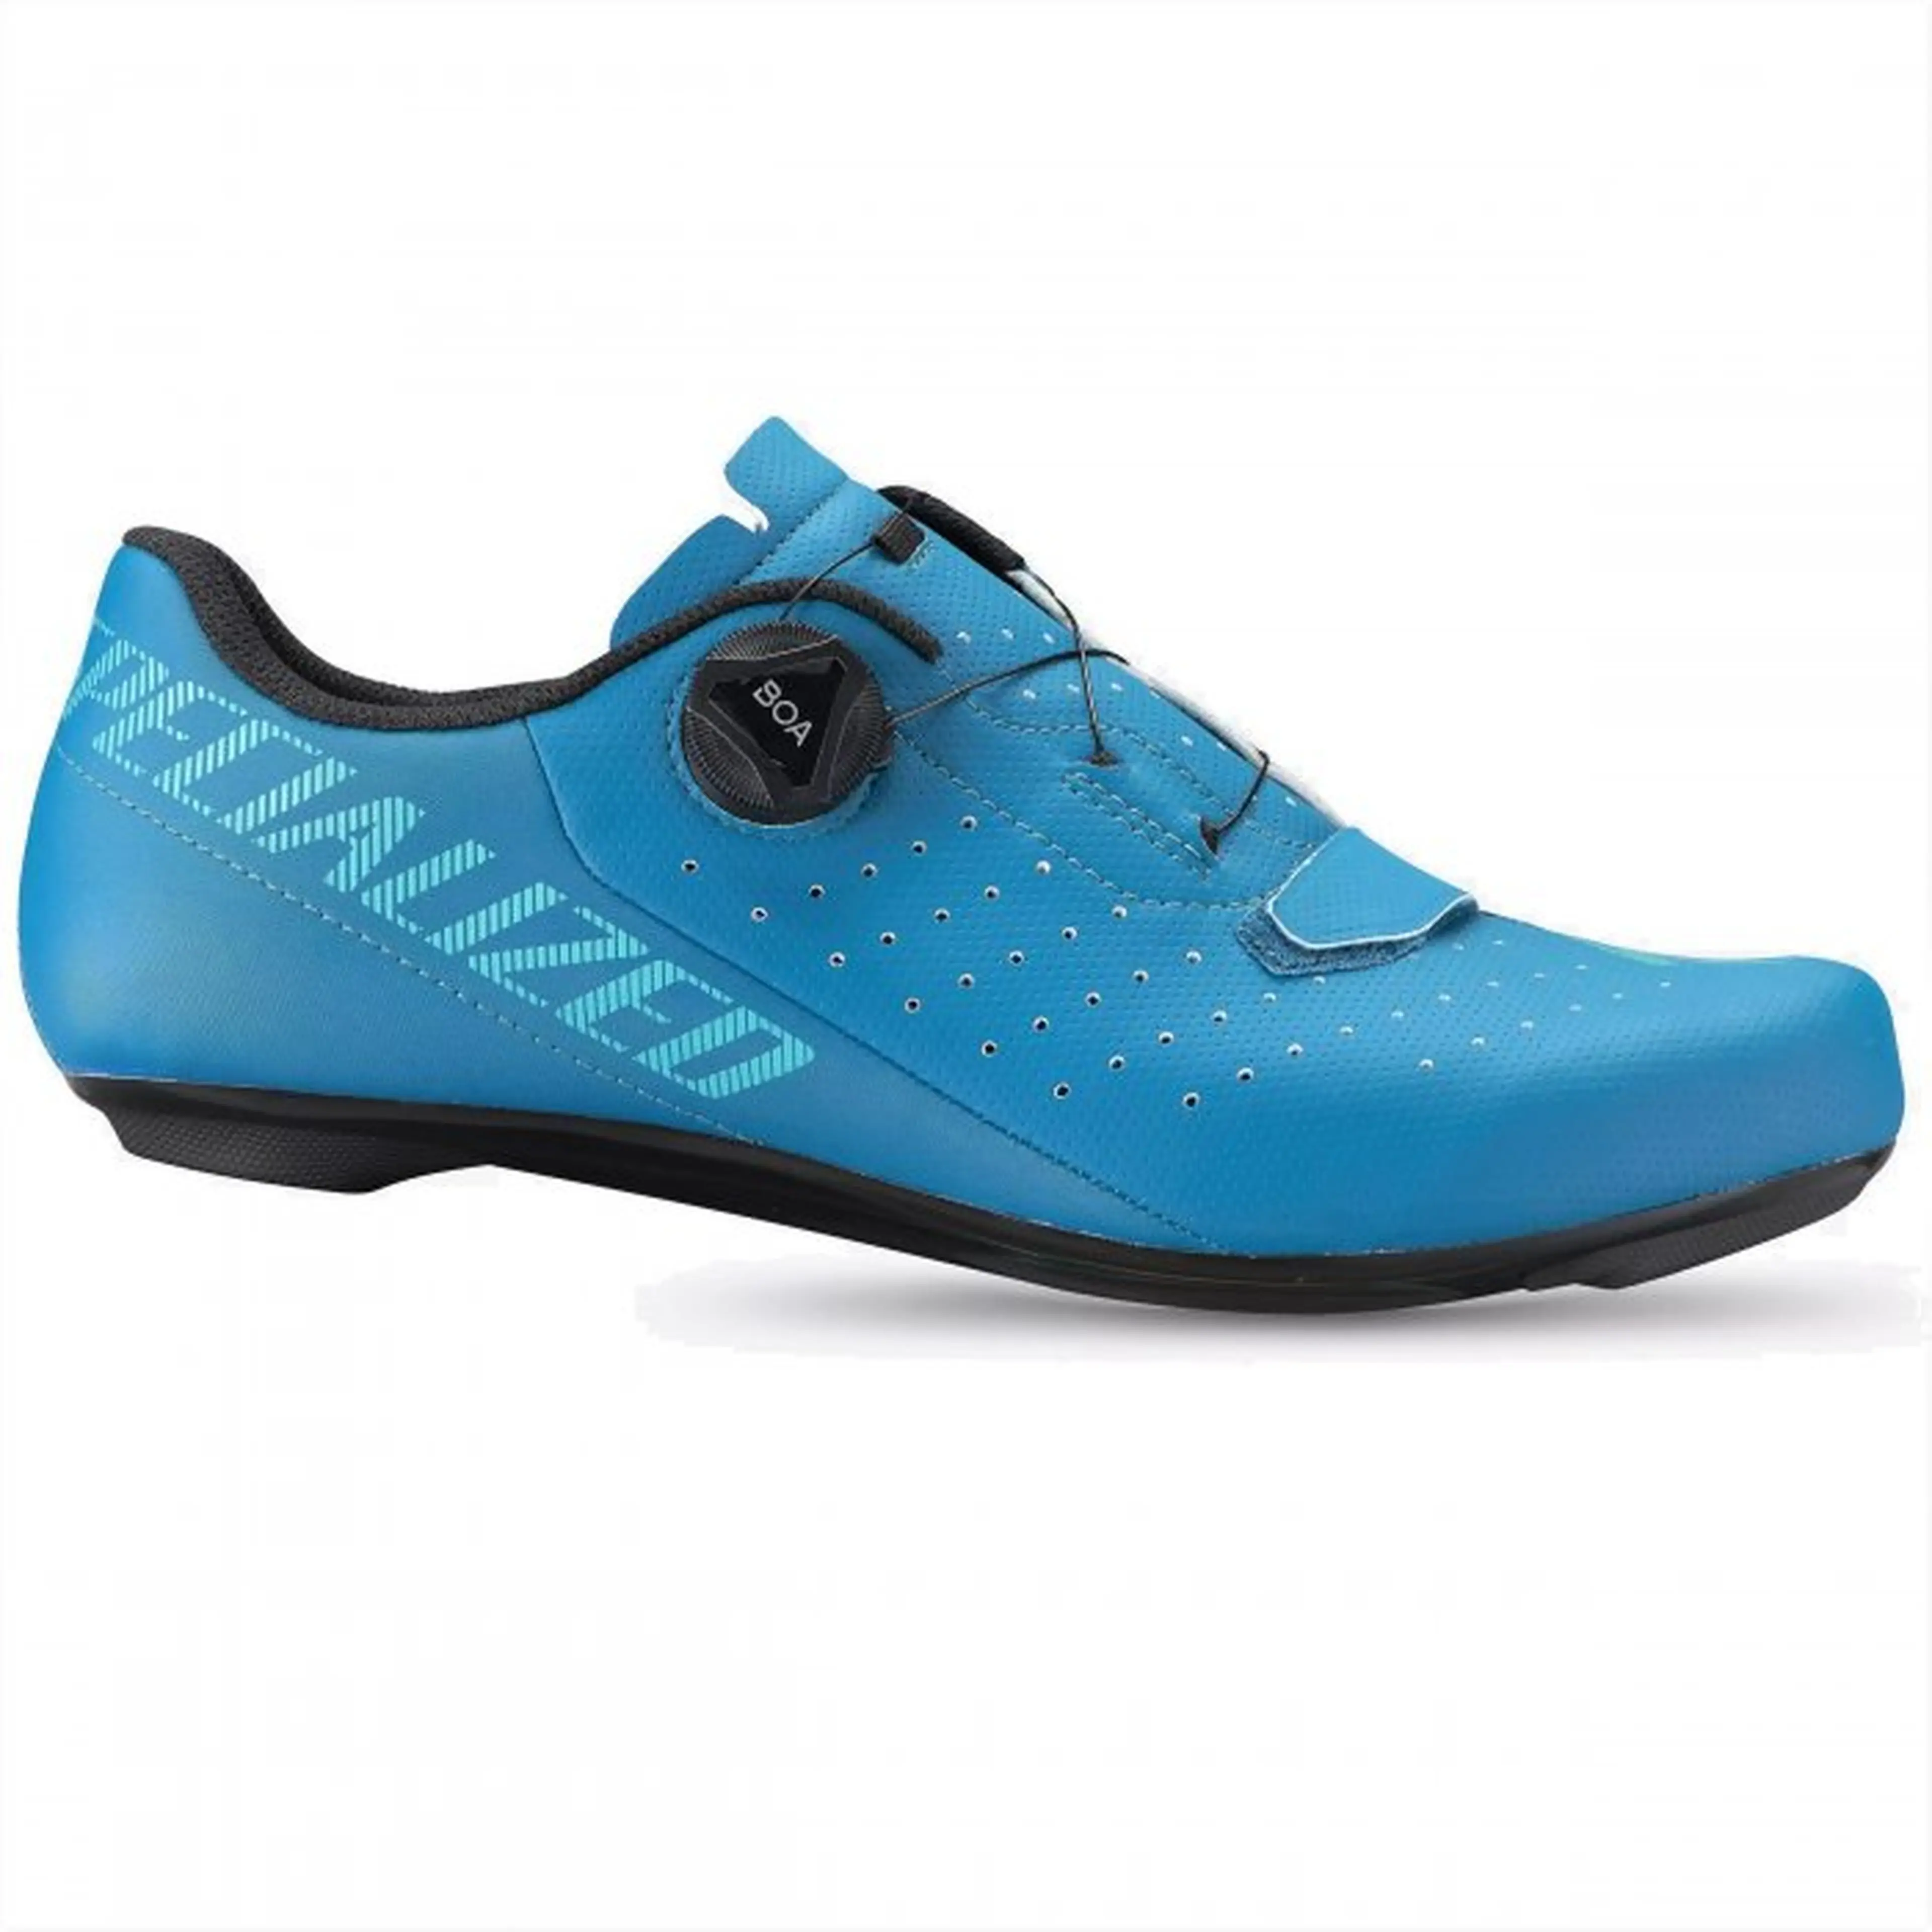 1. Pantofi SPECIALIZED Torch 1.0 Road - Tropical Teal/Lagoon Blue